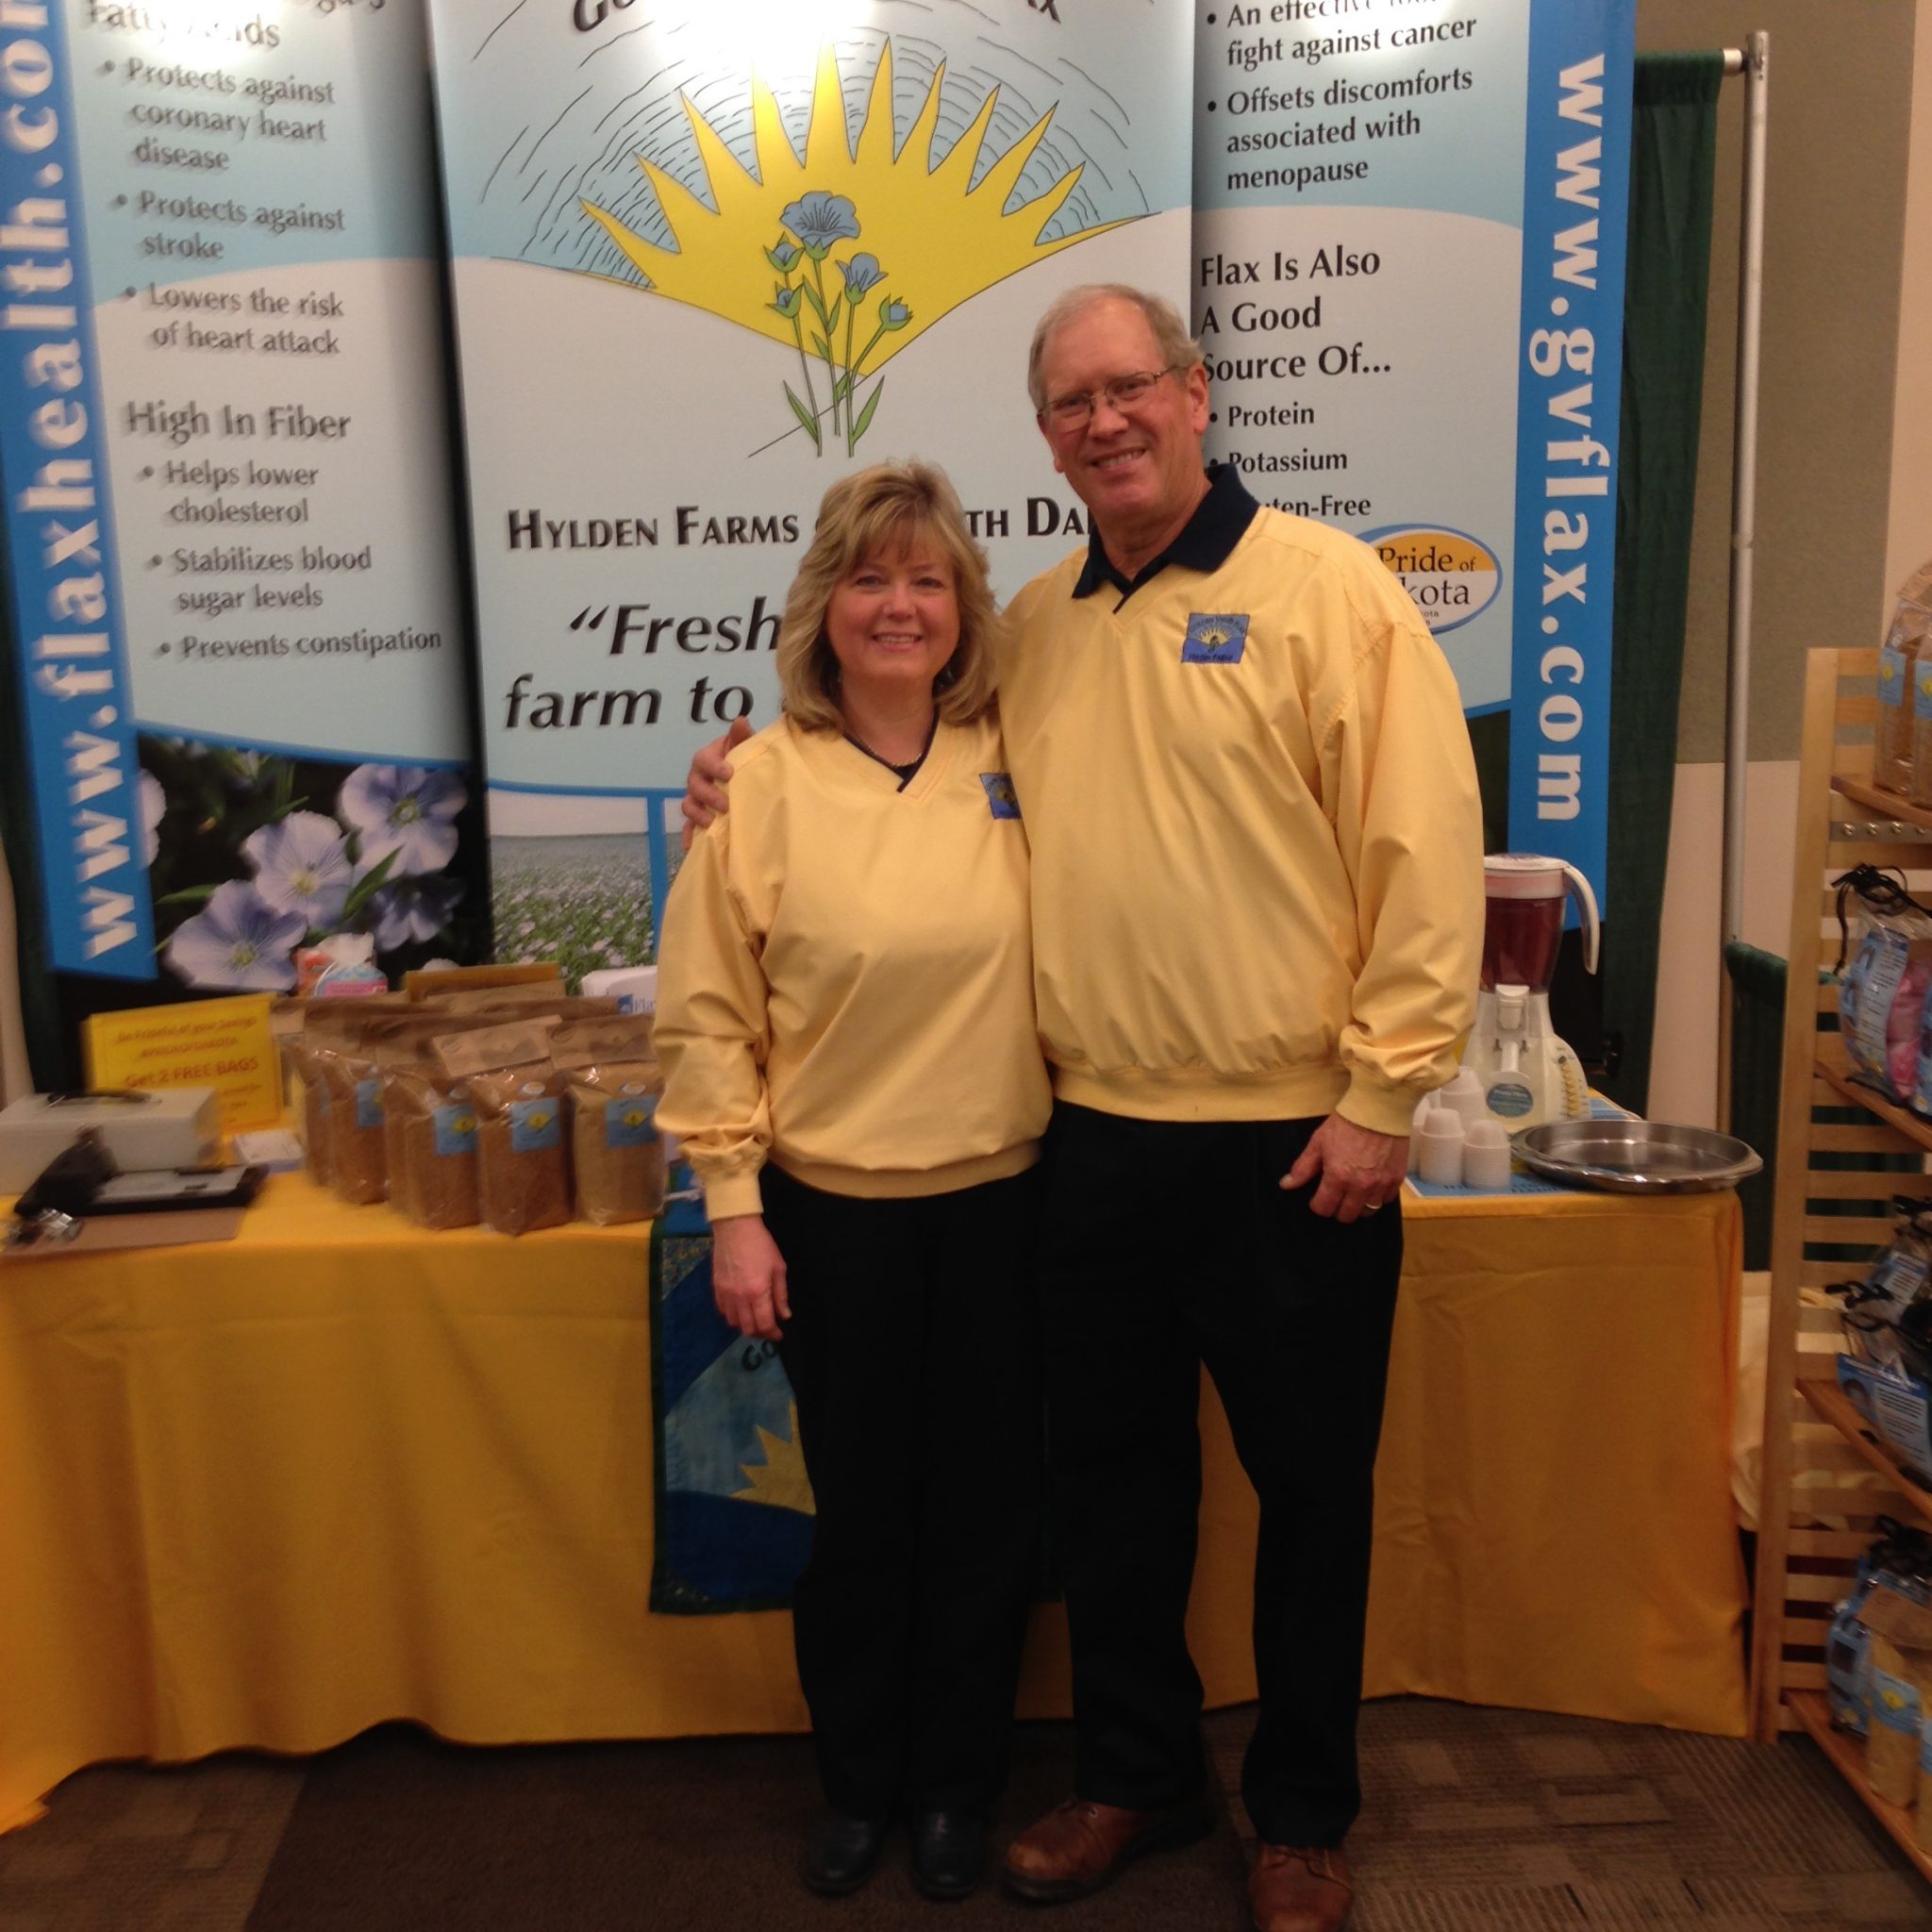 Esther and Mark Hylden promoting health benefits of flax